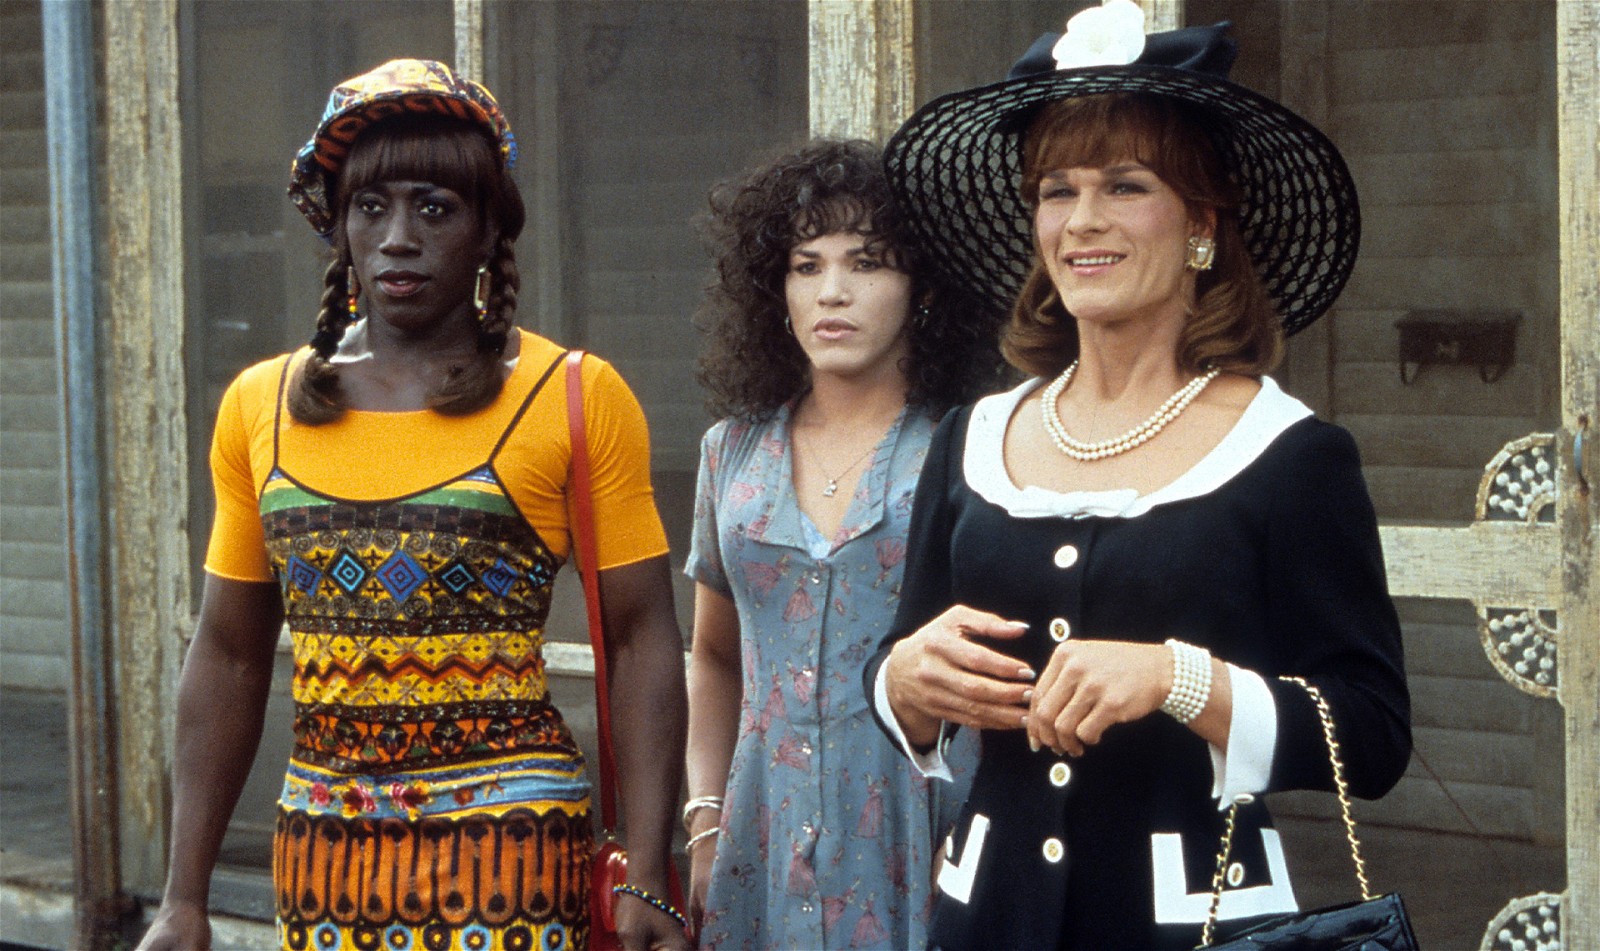 Wesley Snipes, John Leguizamo, and Patrick Swayze (L to R) in To Wong Foo [Credit: Amblin/Universal Pictures]